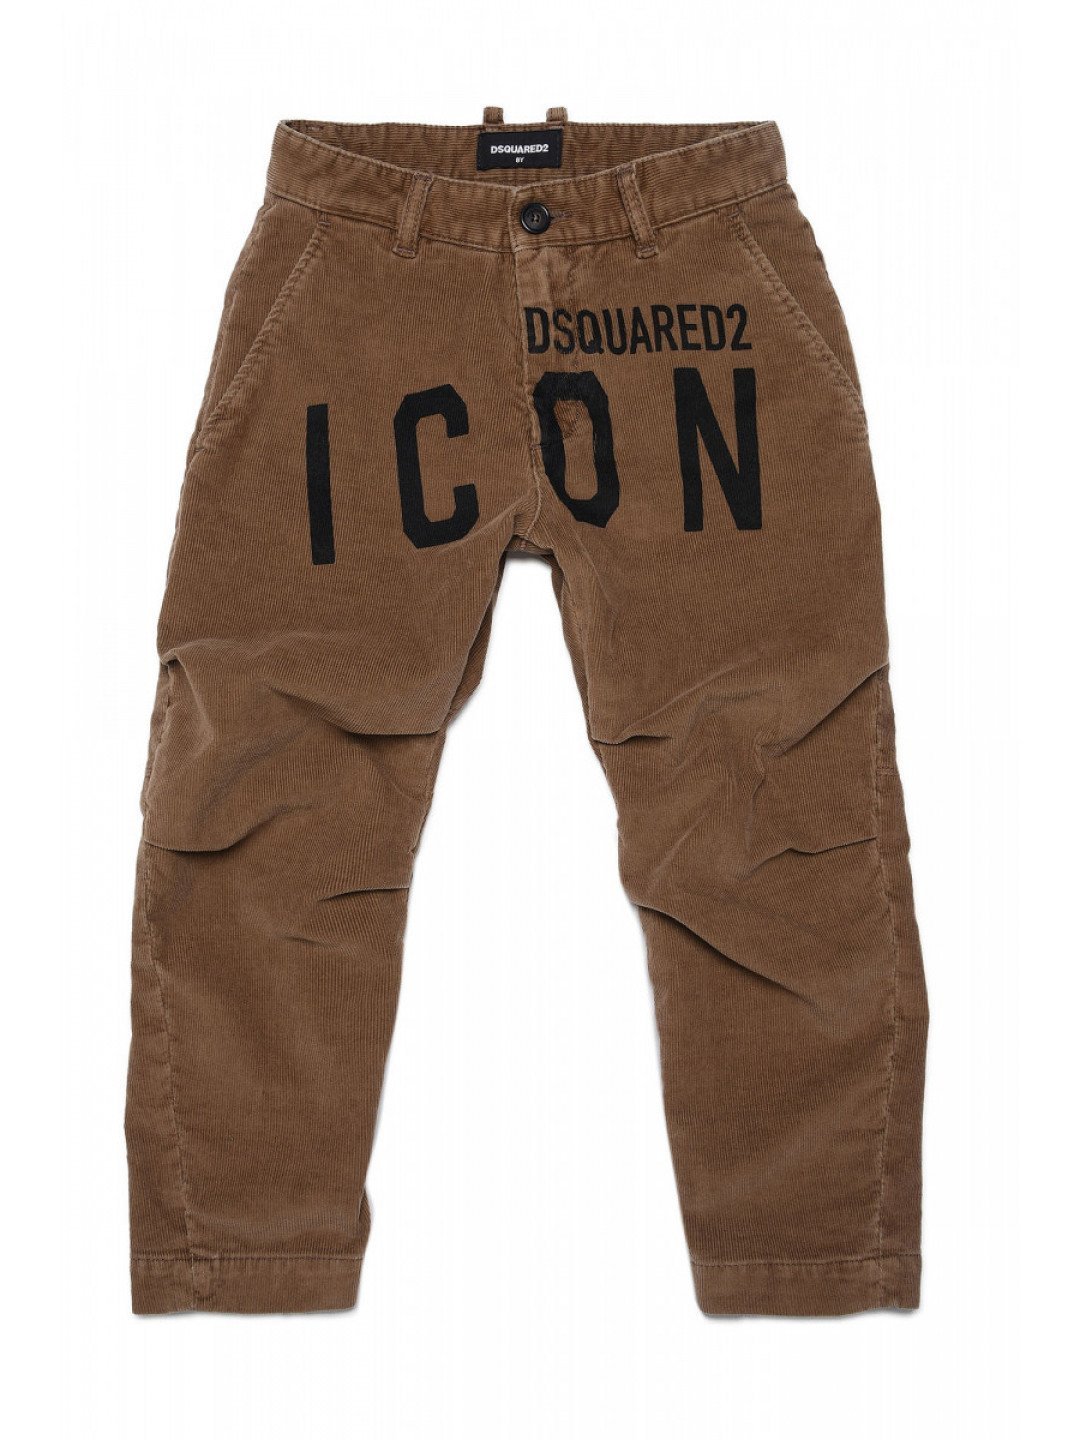 Kalhoty dsquared2 icon trousers hnědá 8y